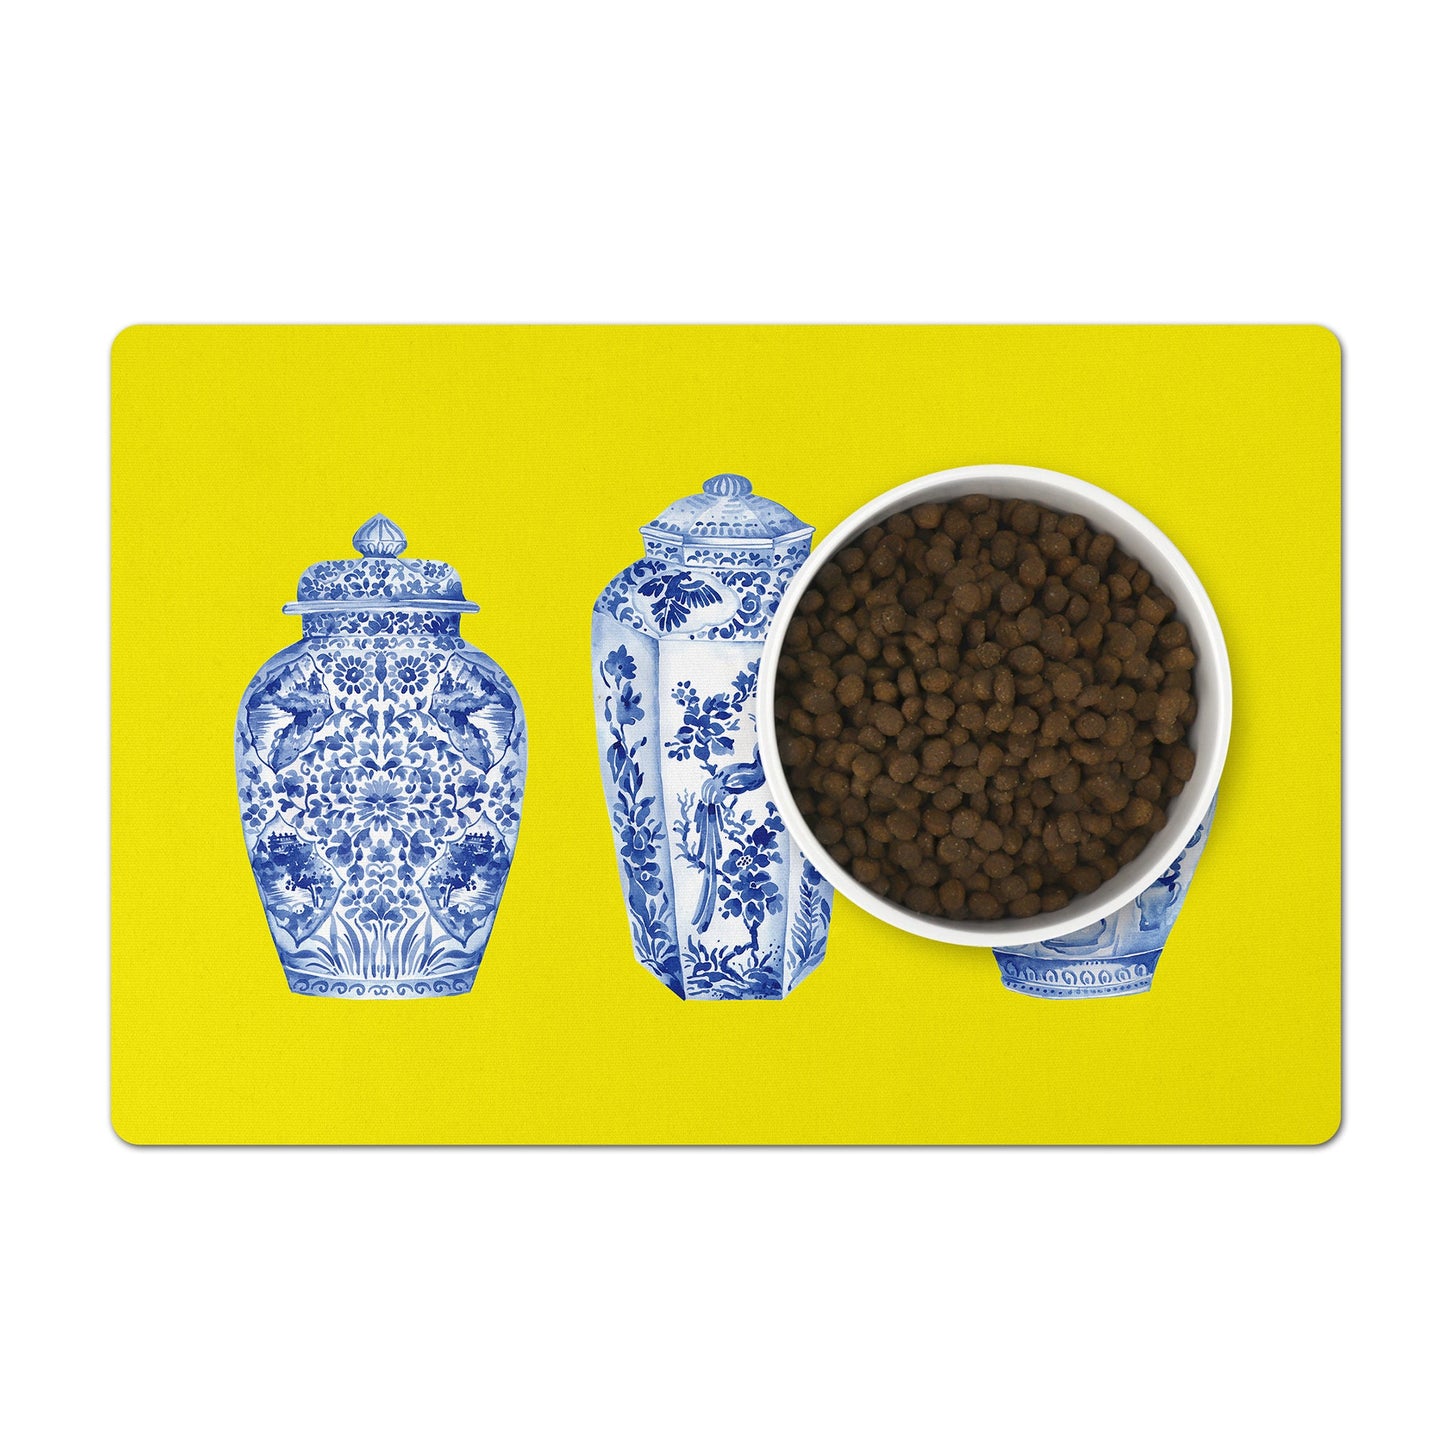 Pet feeding mat for cat or dog bowls in yellow with blue and white ginger jars print.